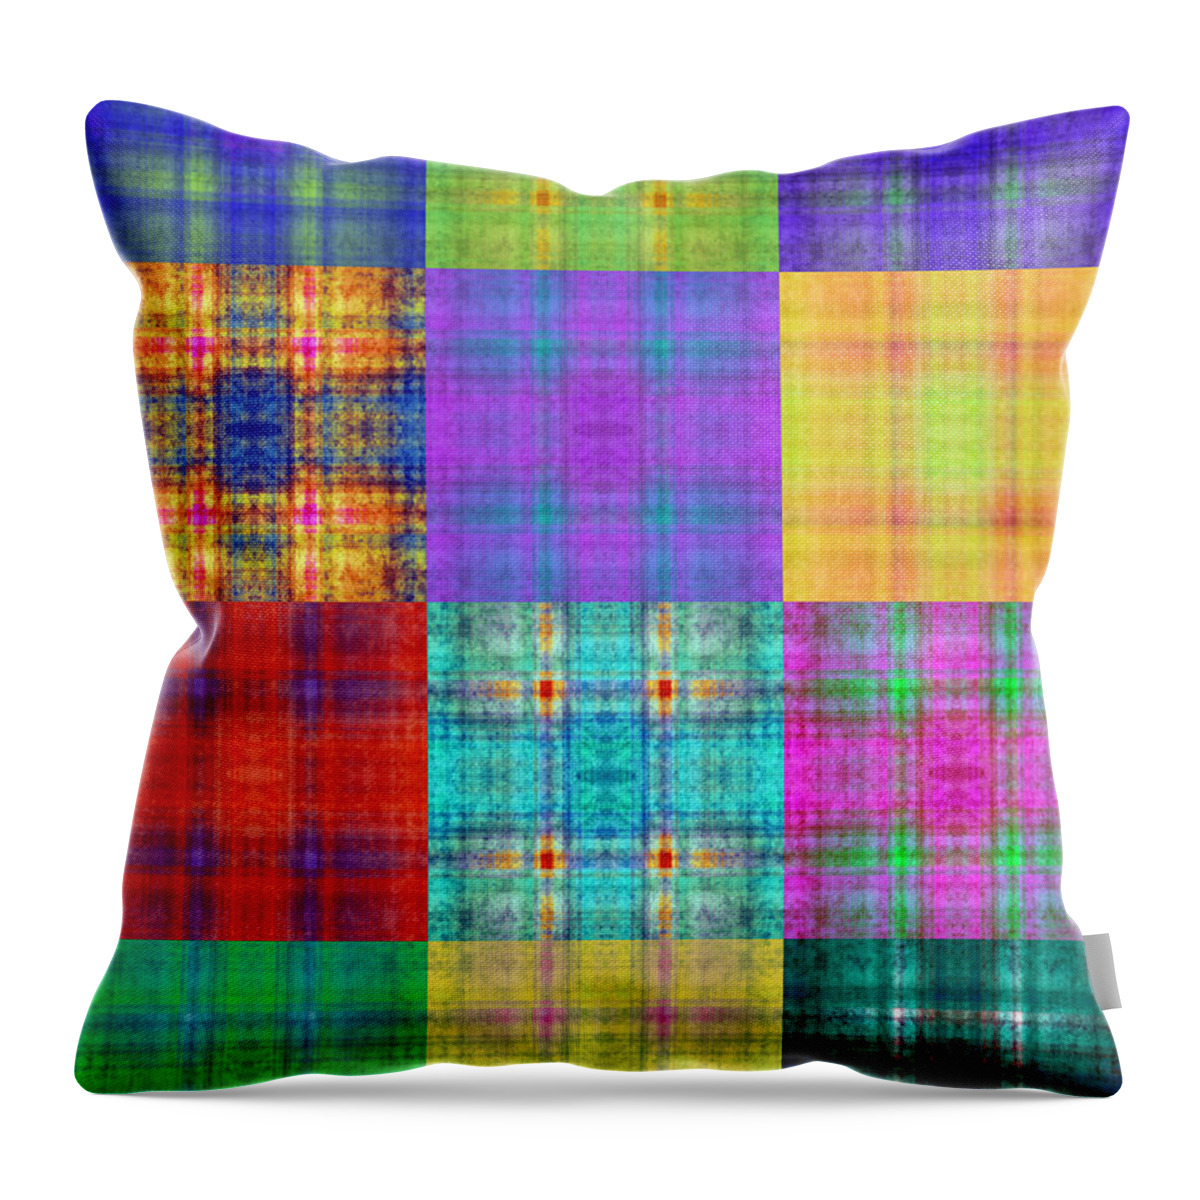 Andee Design Abstract Throw Pillow featuring the digital art Colorful Plaid Triptych Panel 1 by Andee Design